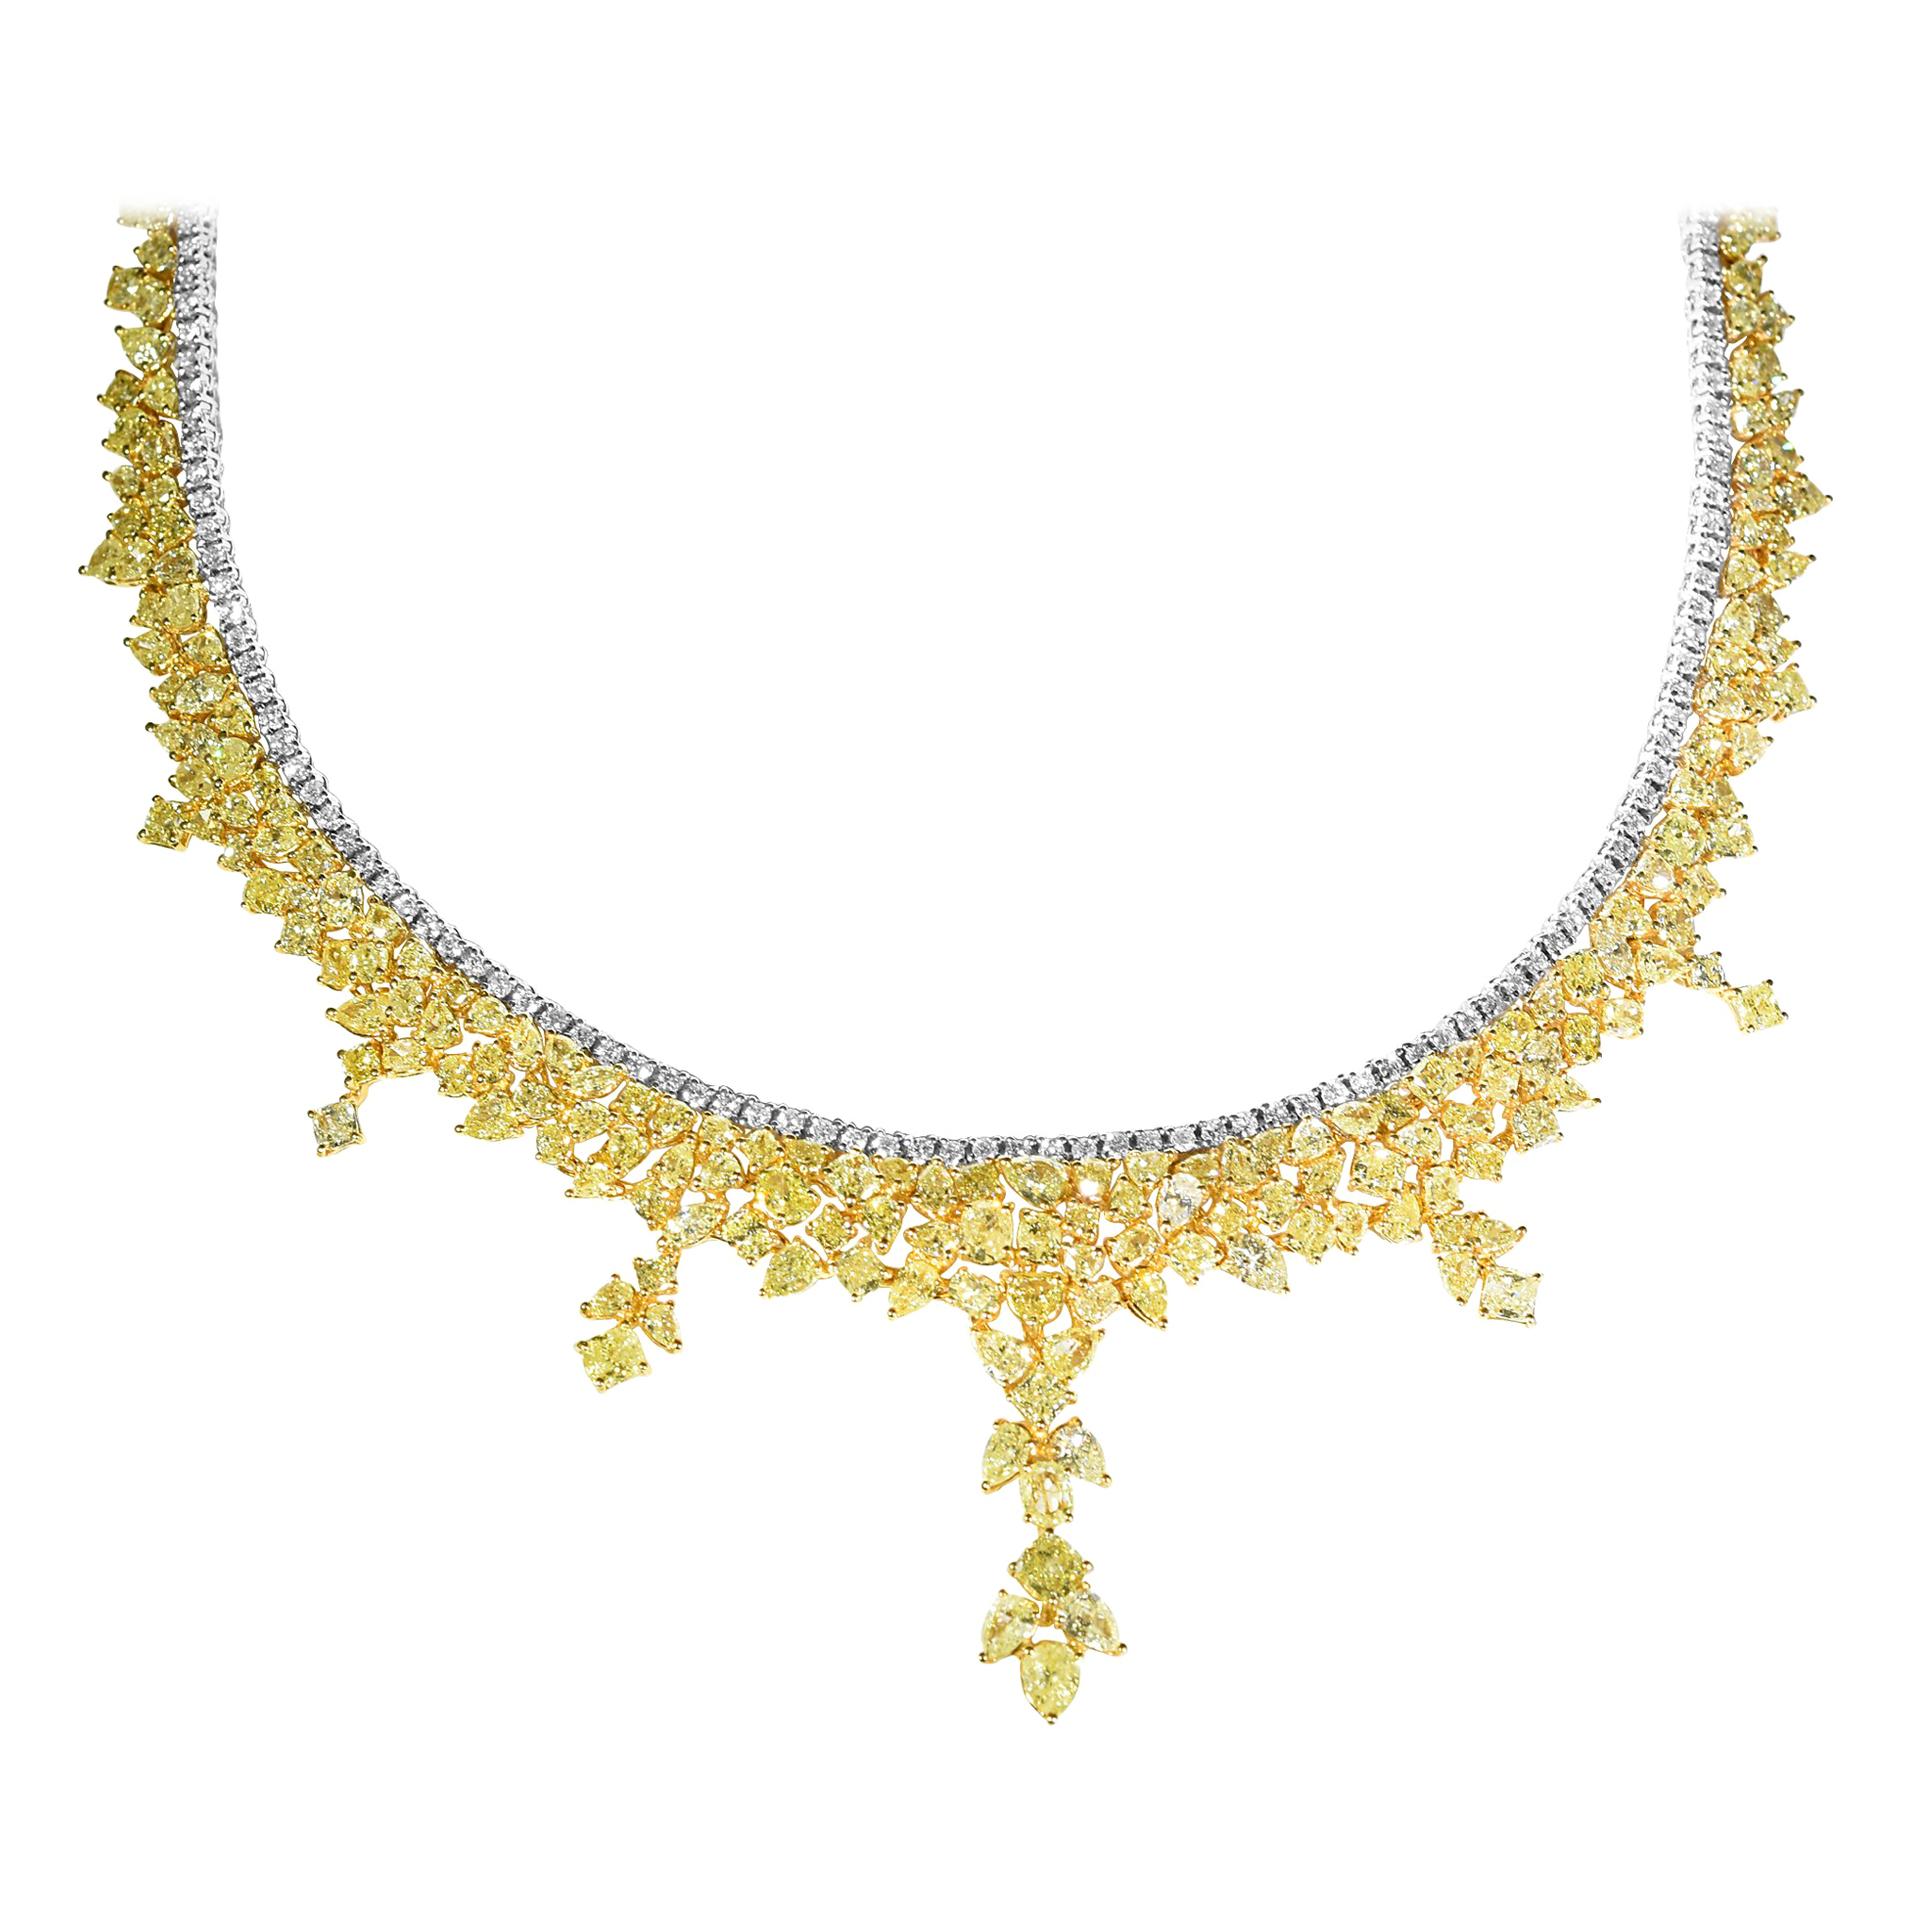 This exquisite GIA Certified 38.33 Carat fashion Natural Yellow Diamond Necklace features 34.23 Carats of Natural Yellow Diamonds and 4.10 Carats of White Diamonds. This magnificent necklace is set in 18 Karat Yellow and White Gold and weighs 48.60